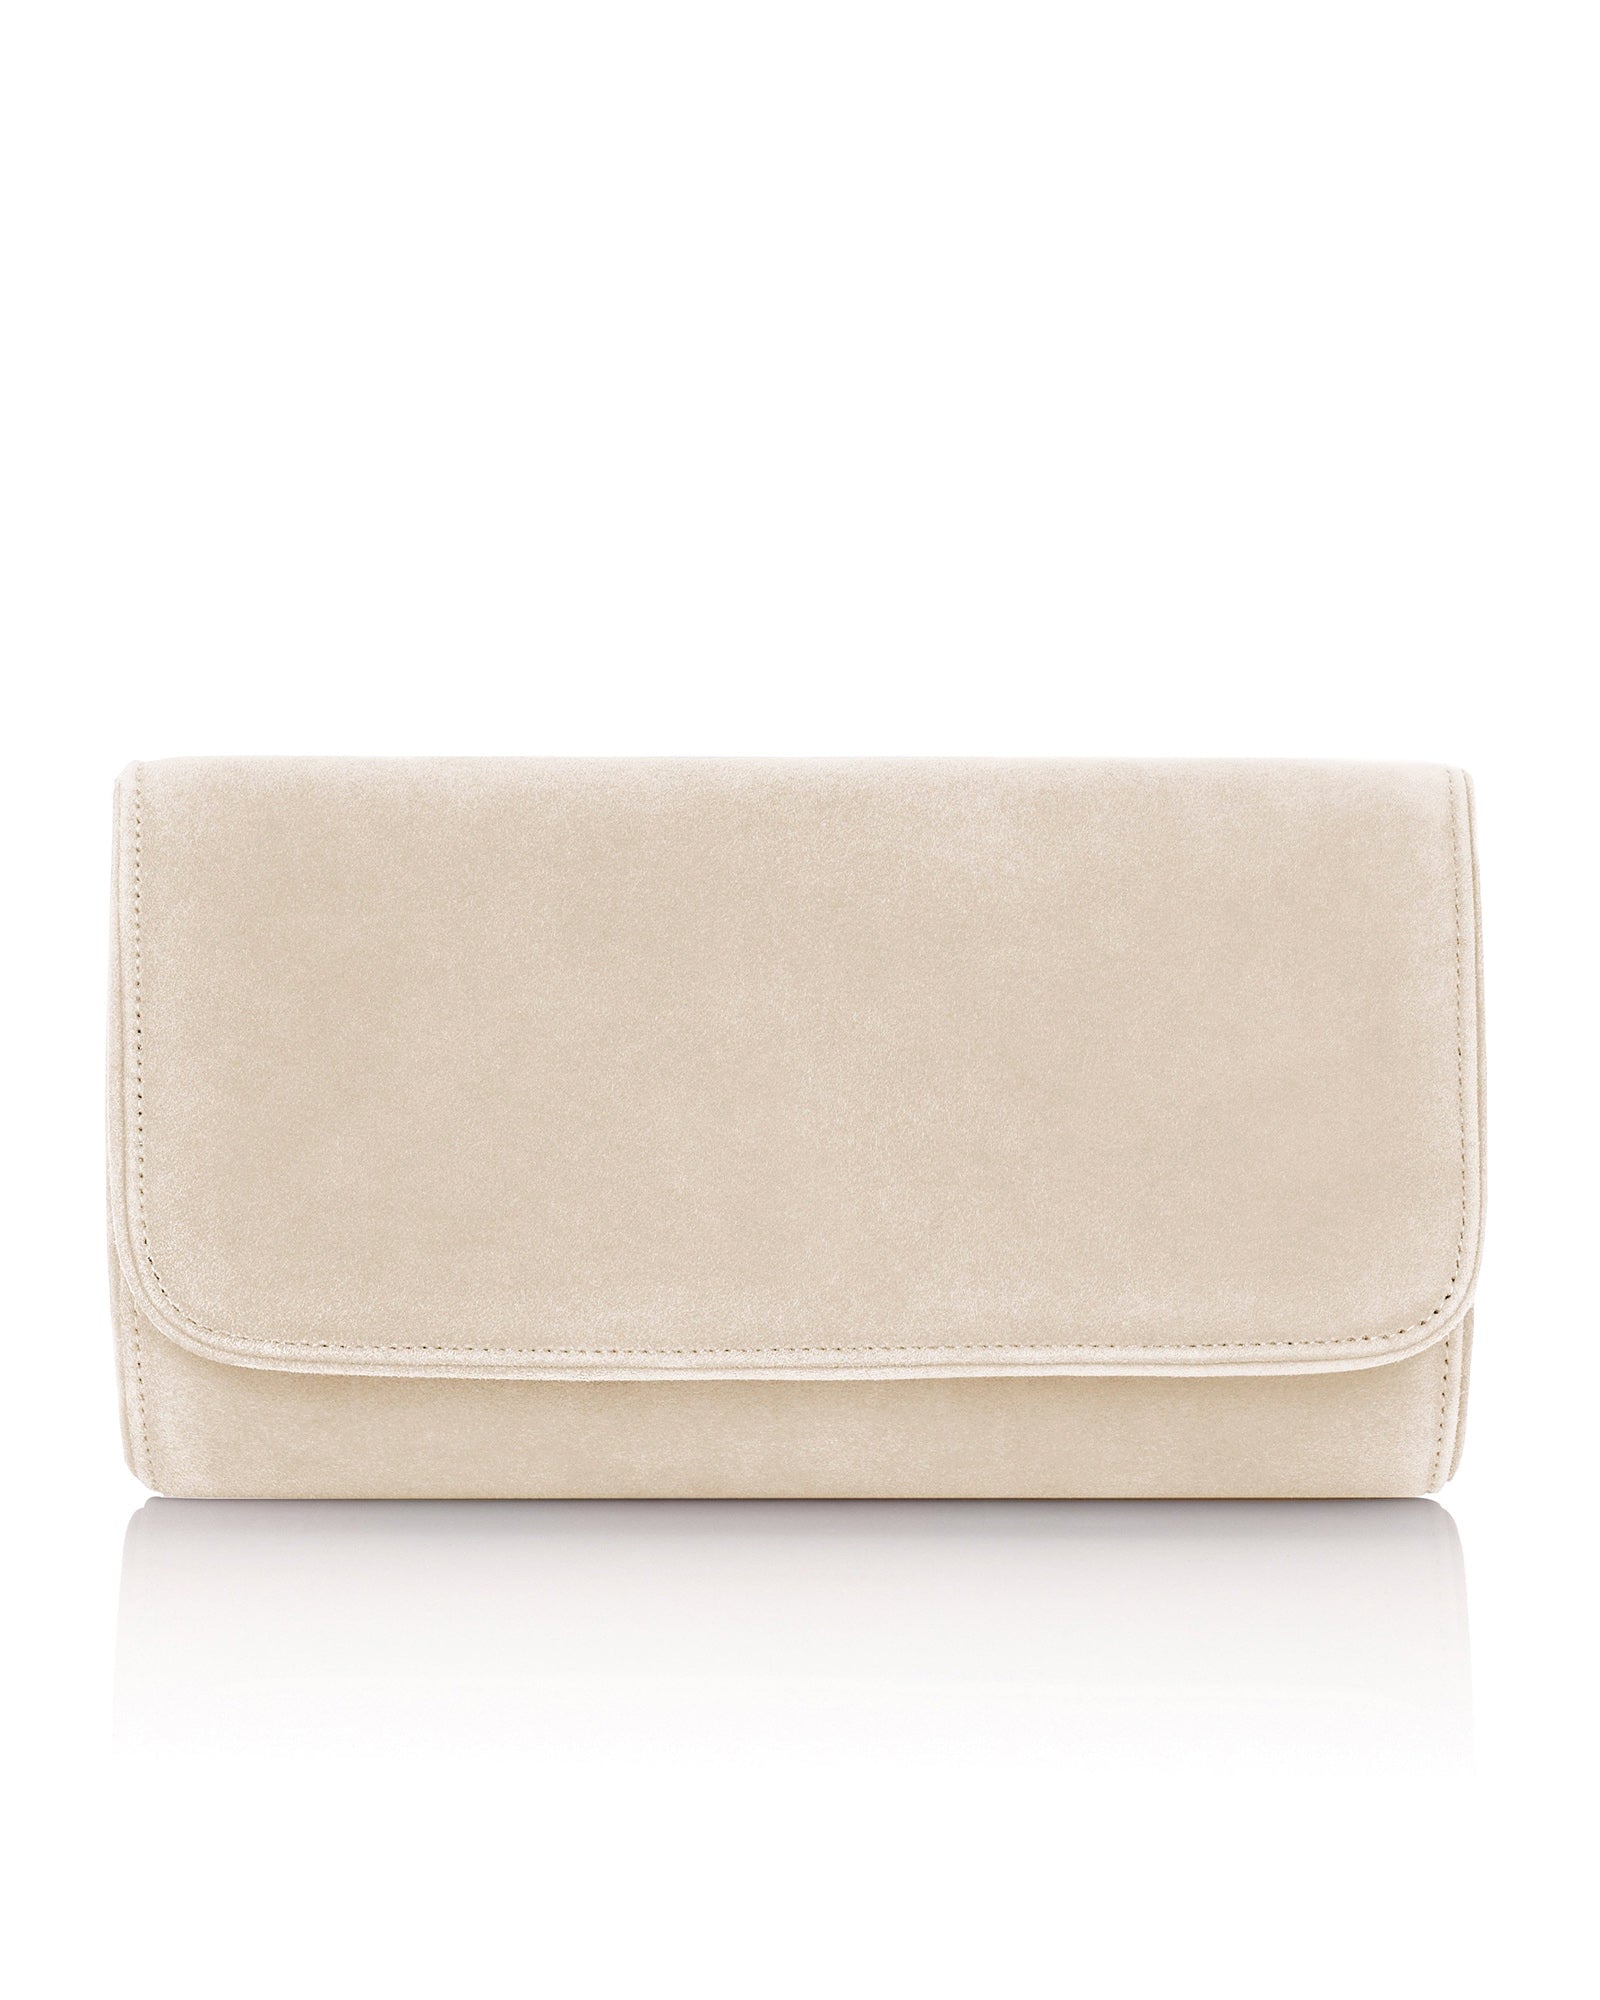 Clutch Bags: How to Wear One and What to Look For - SENREVE